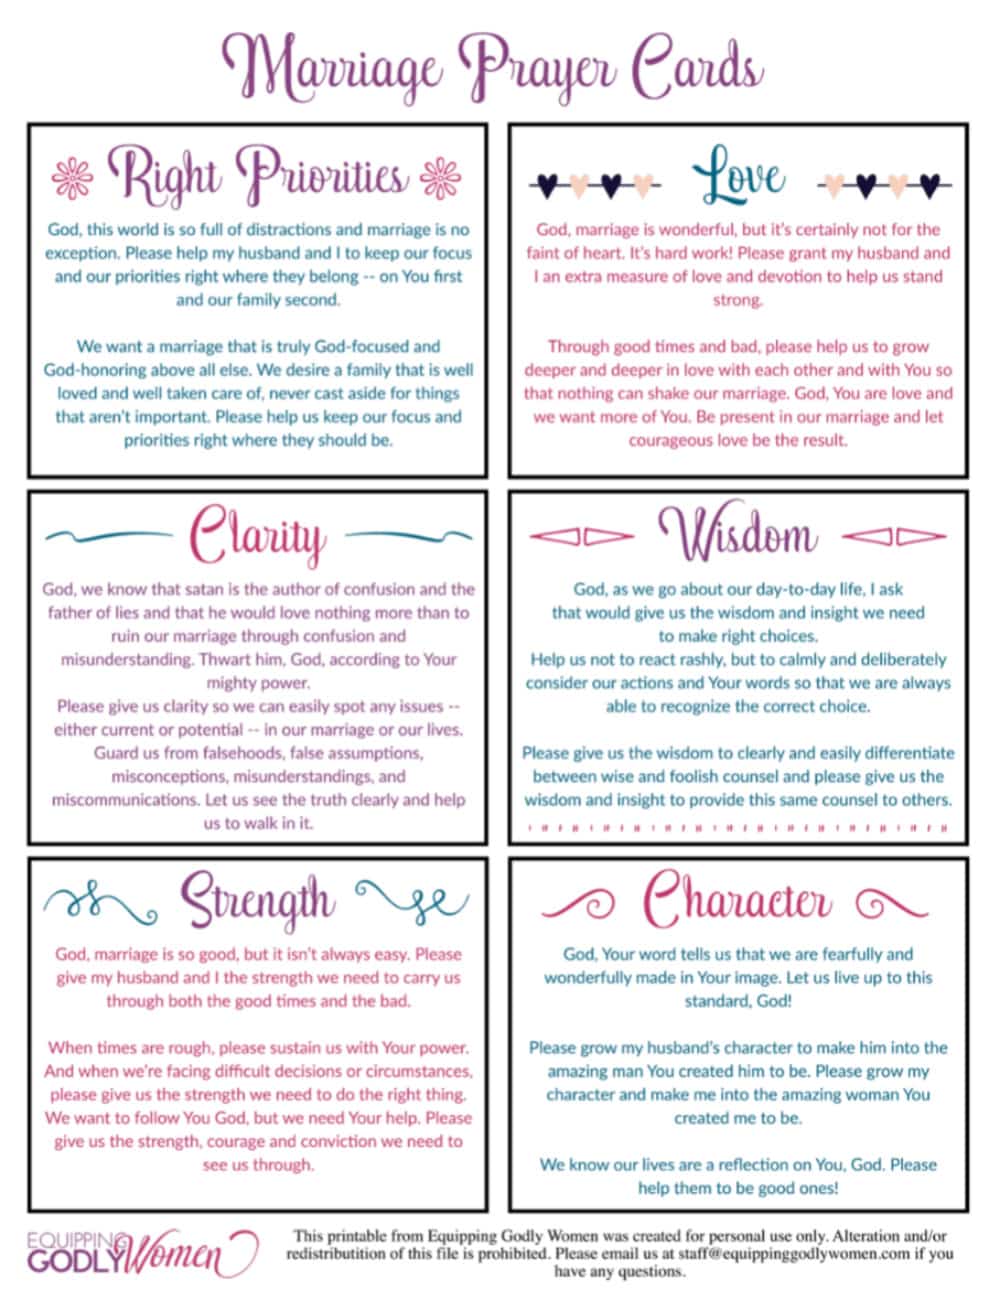 Marriage Prayer Cards